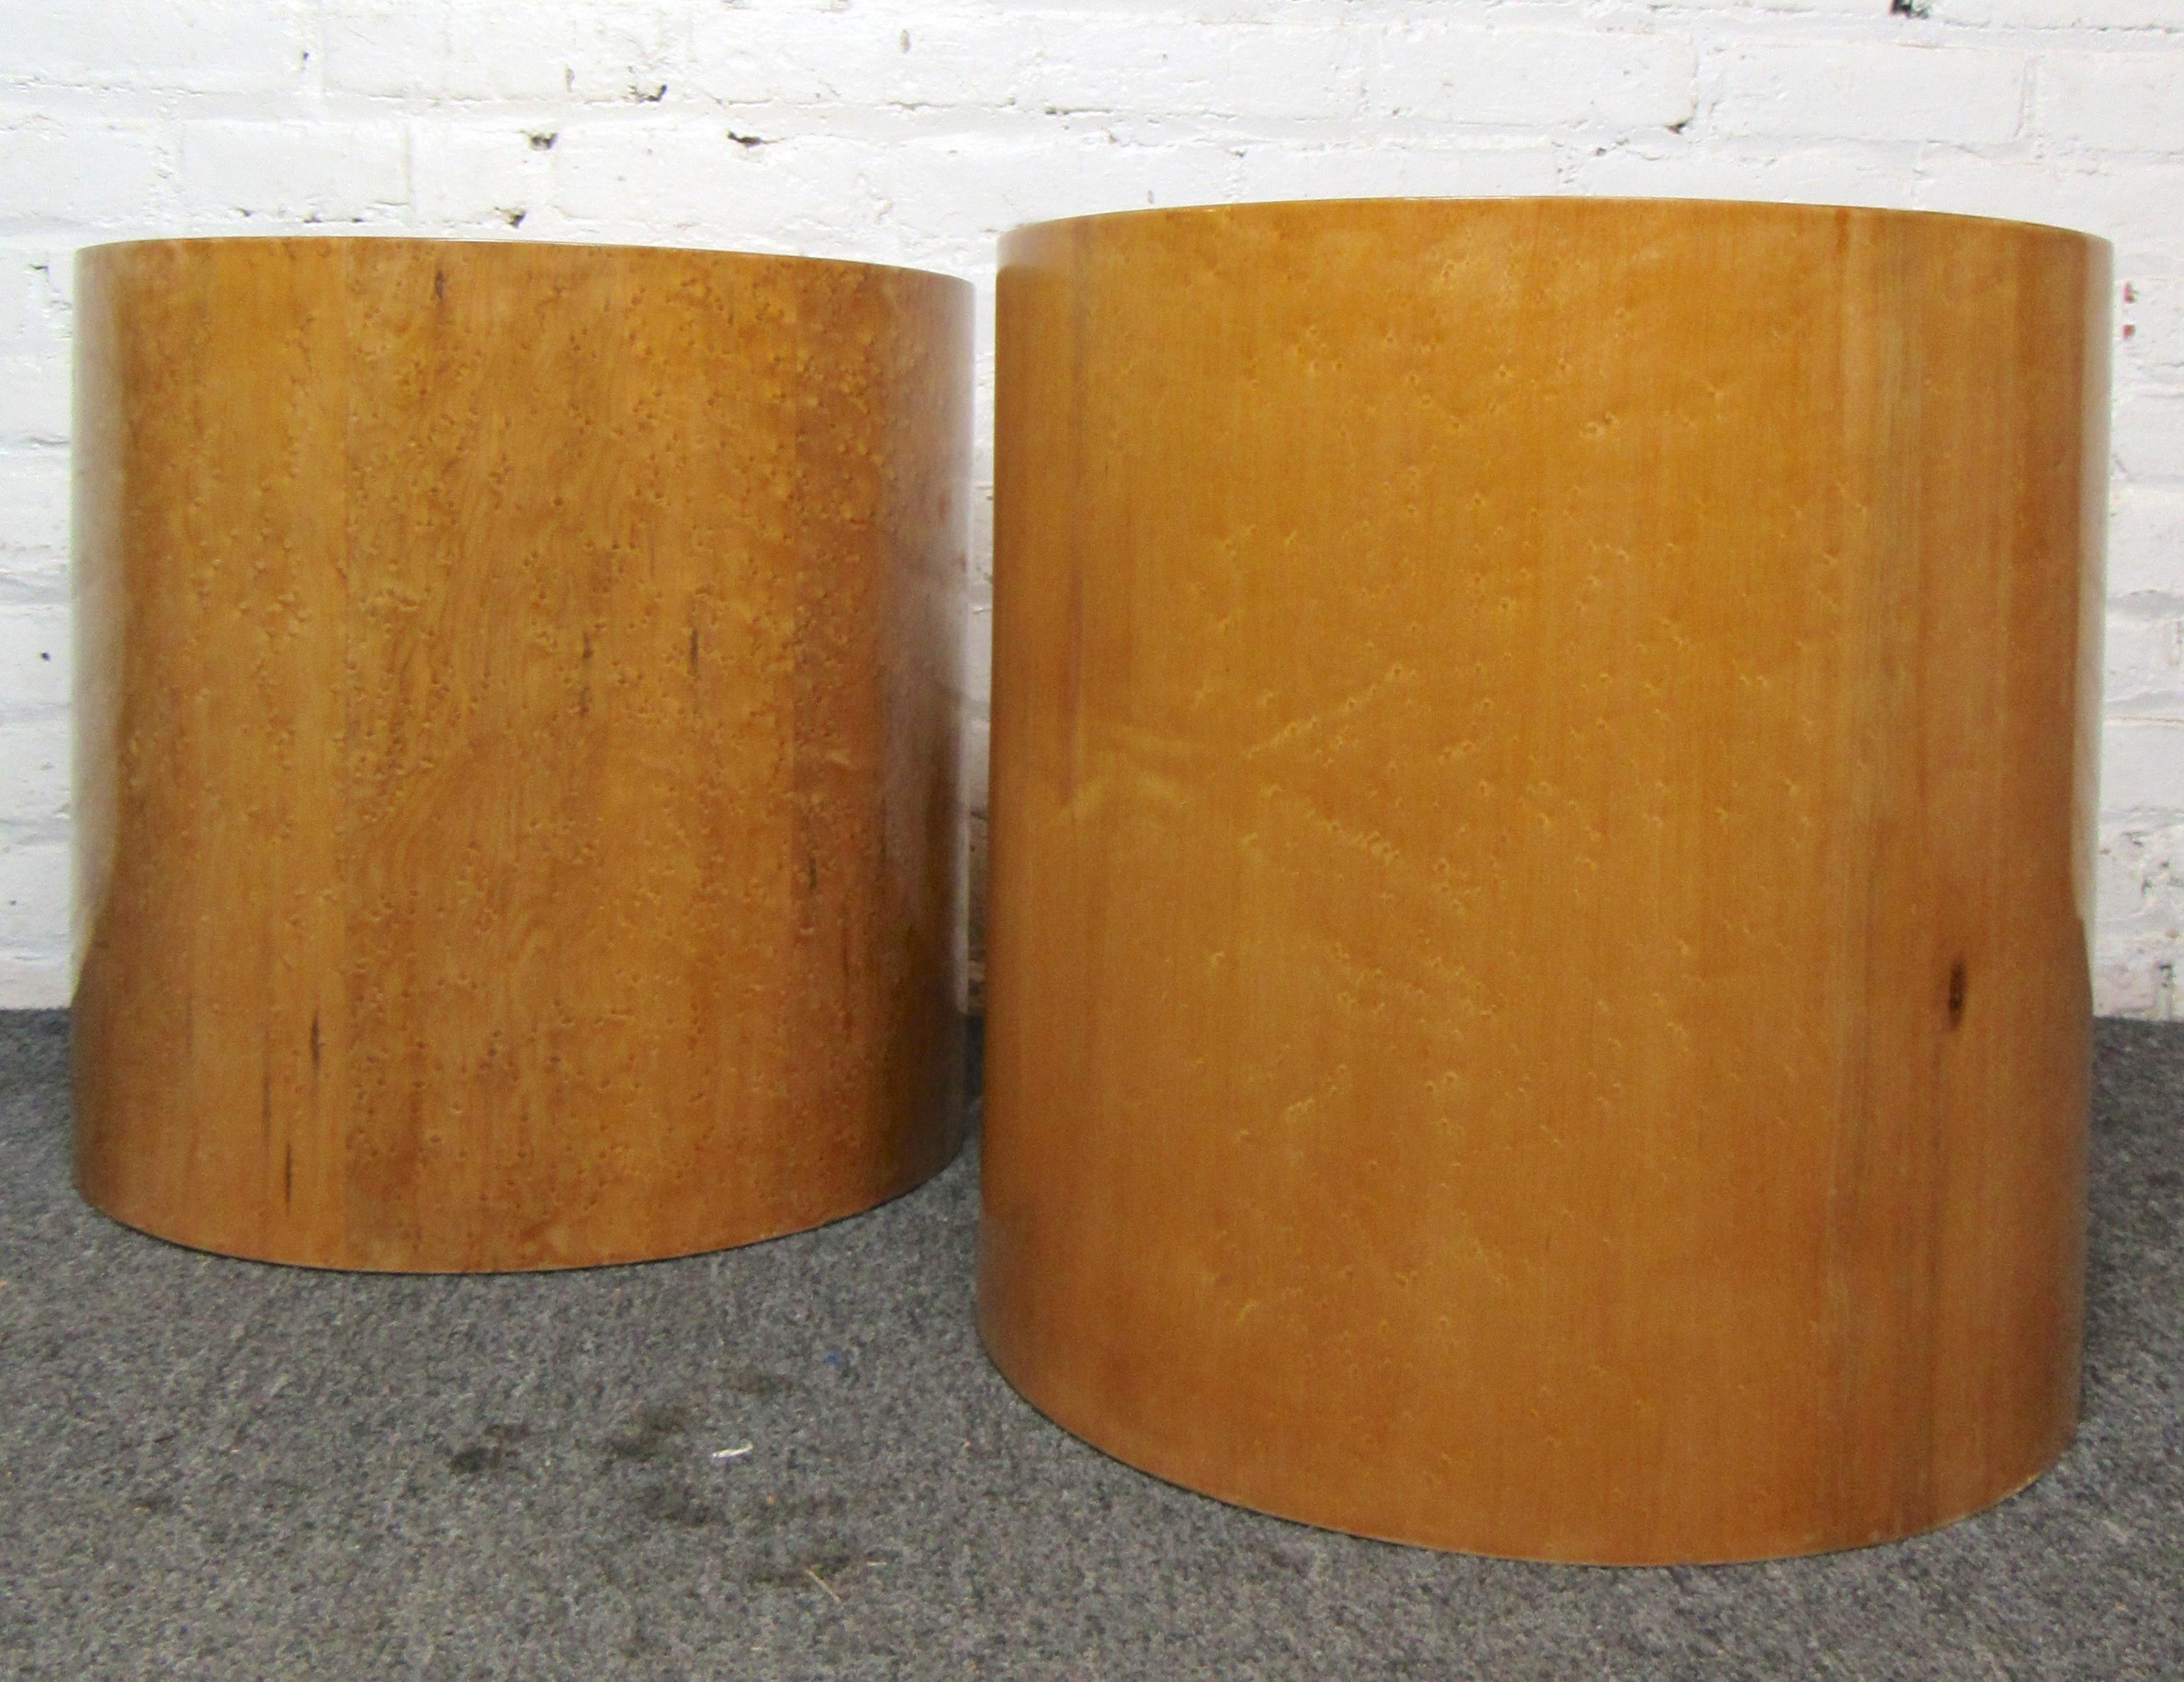 Low burl wood wrapped pedestals. Great as sofa side tables, or pedestals.
Location: Brooklyn NY.